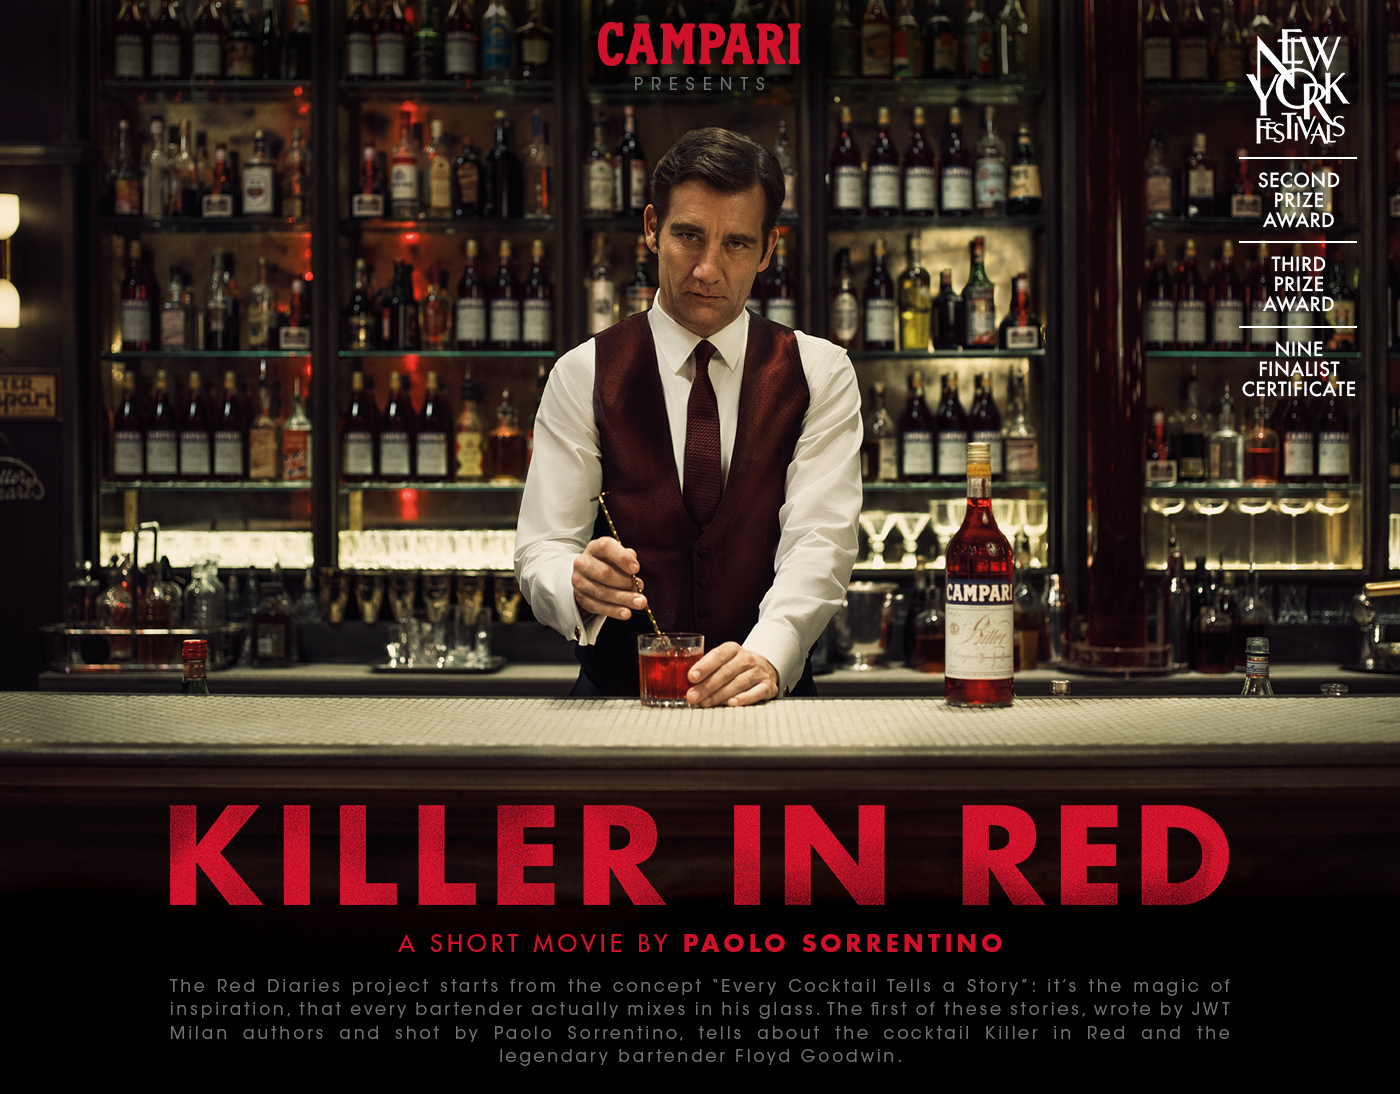 Campari killer in red Paolo Sorrentino commercial Photography  storytelling   plot story copywriting  inspire